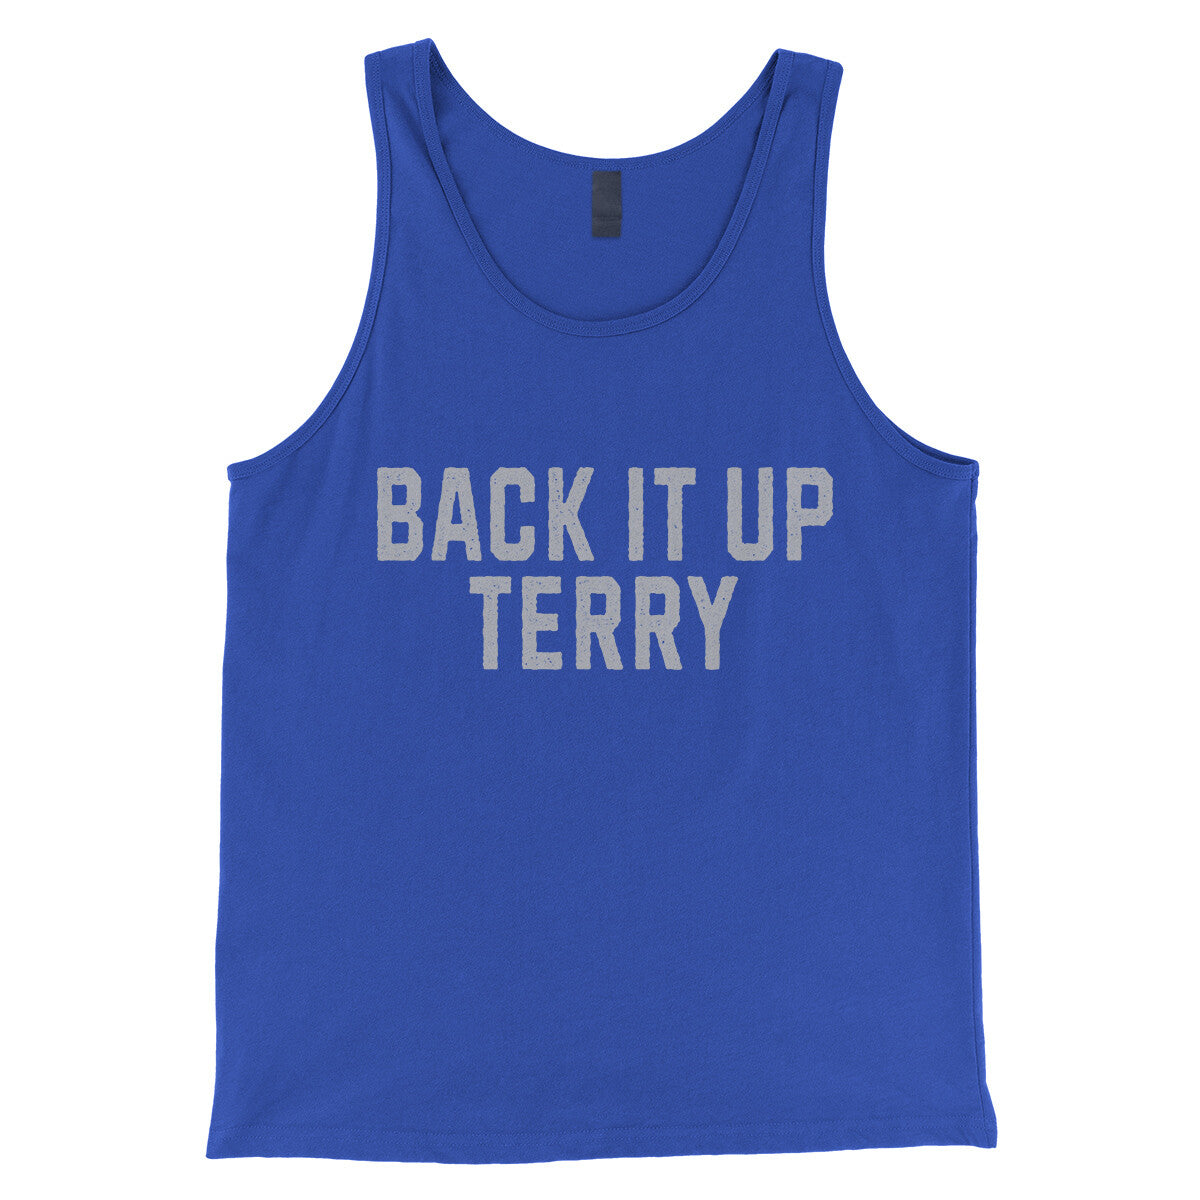 Back it up Terry in True Royal Color